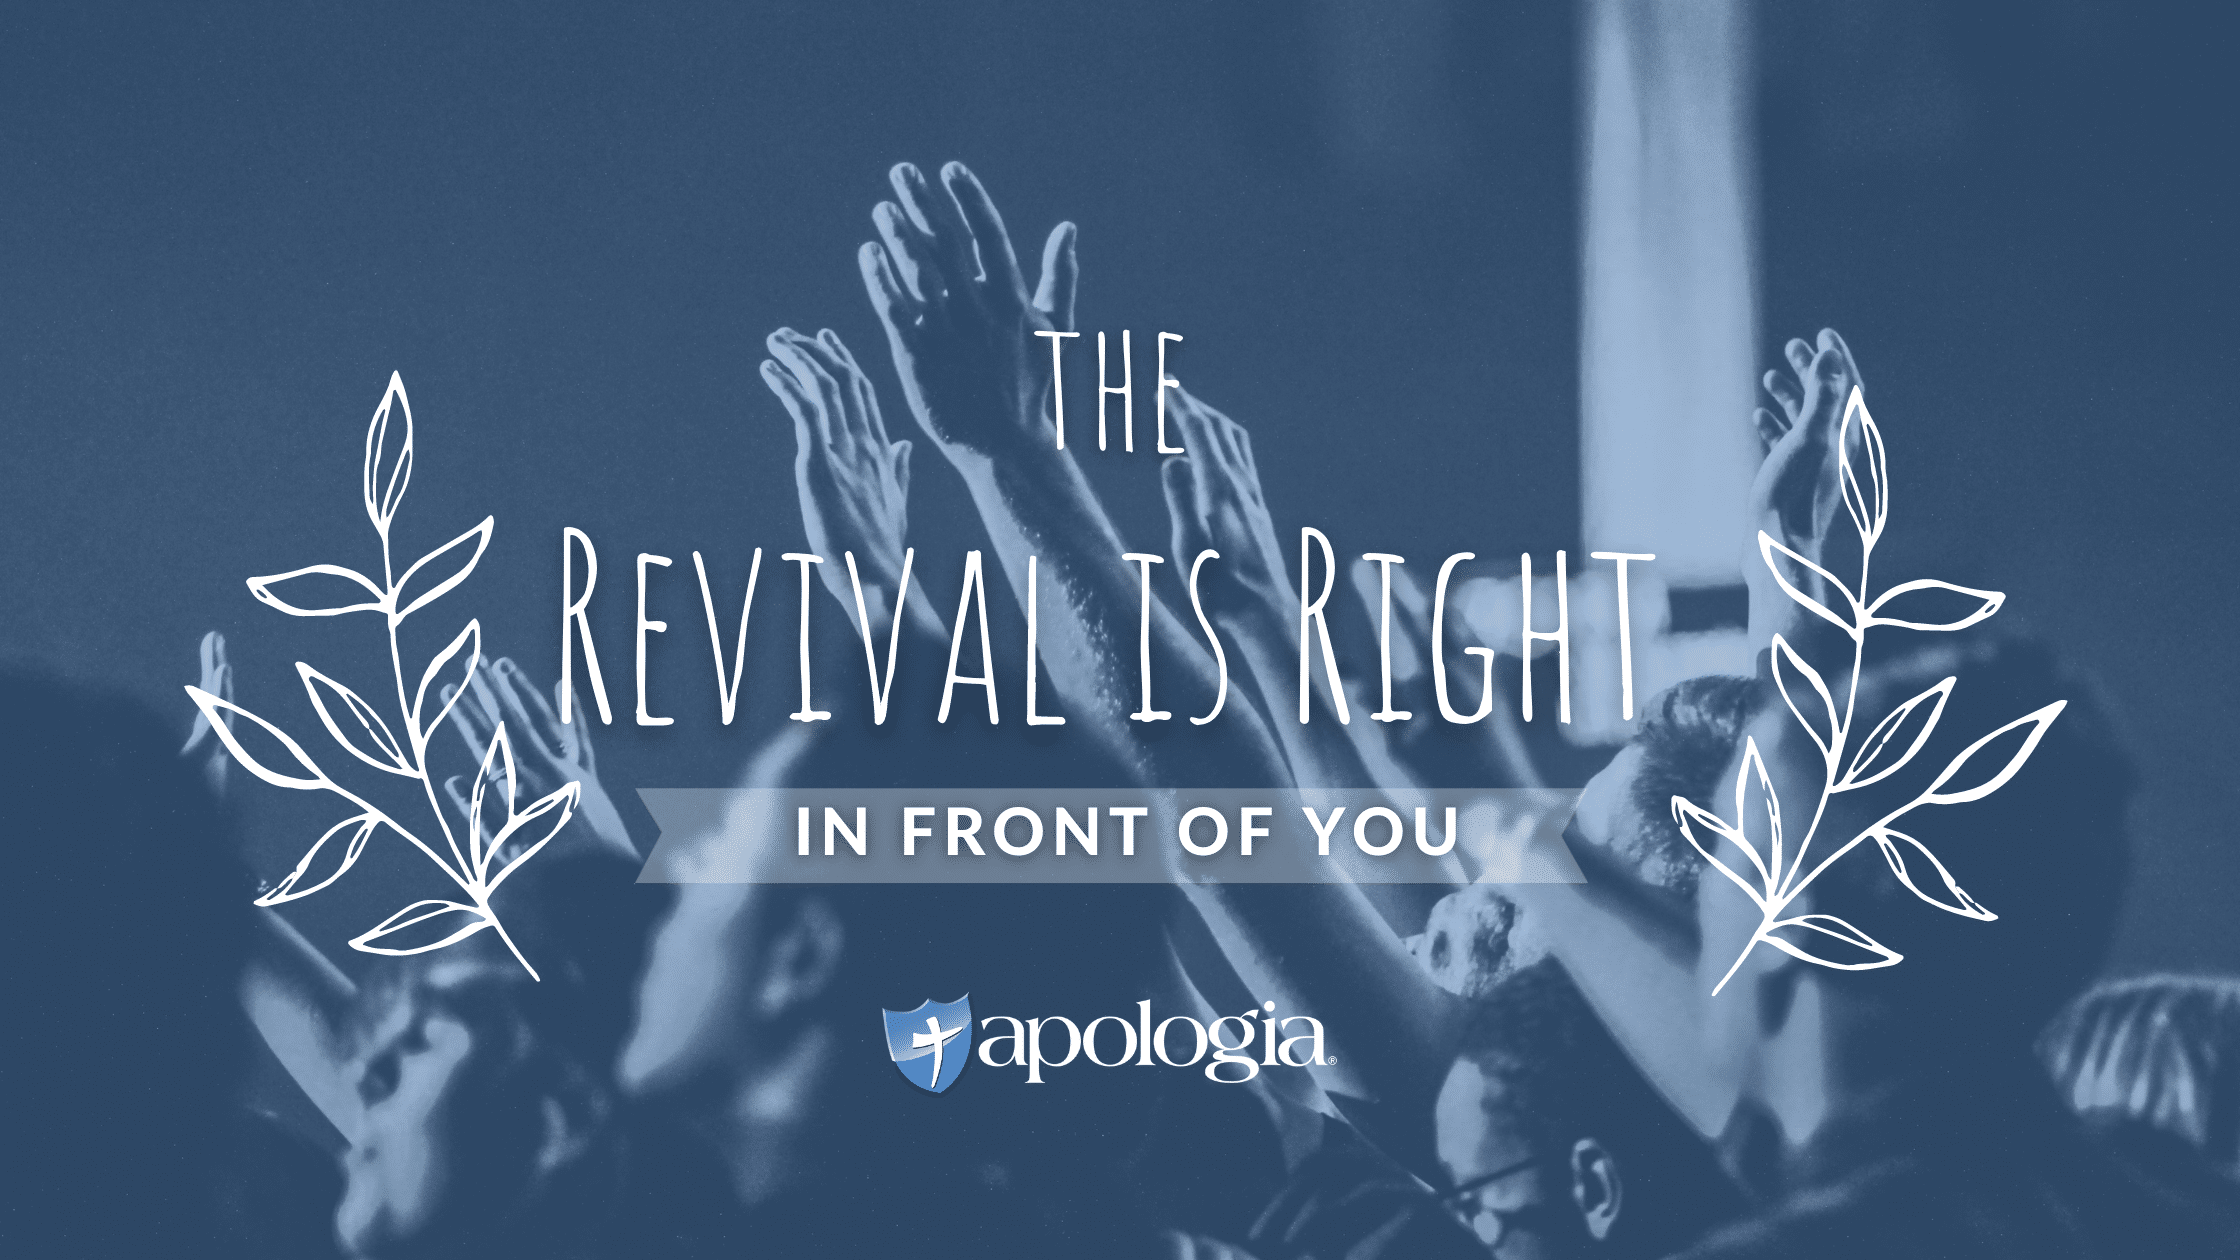 The Revival is Right in Front of You